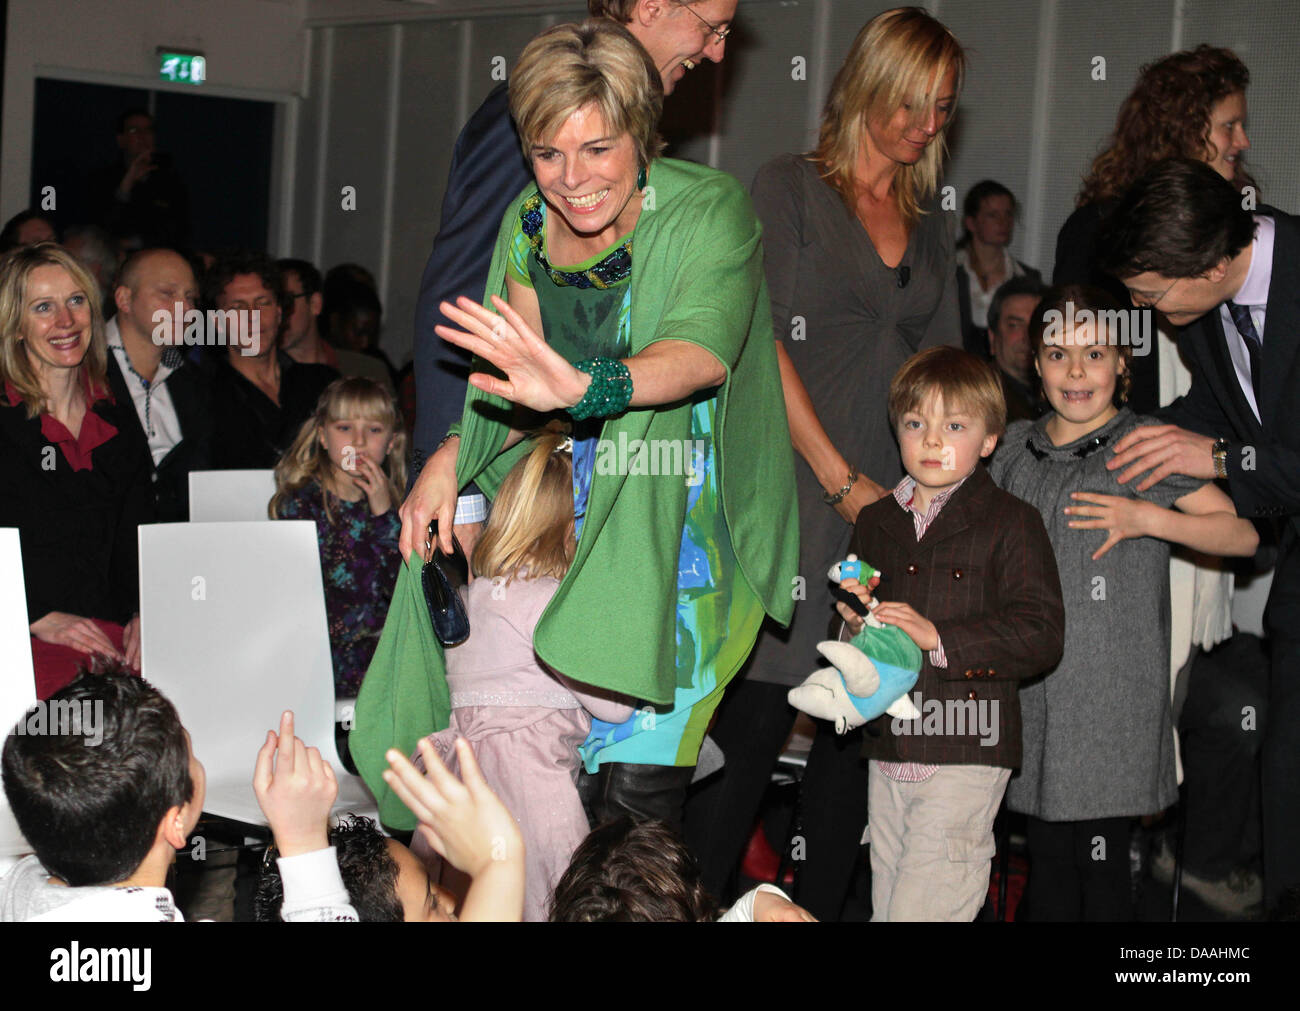 The children of Dutch Princess Laurentien (C), Princess Leonore (hidden in her mothers dress), Prince Claus-Casimir and Princess Eloise attend the presention of  Laurentien's new book 'Mr. Finney and the other side of the water' with  her childen Claus-Casimir and Eloise in Rotterdam, The Netherlands, 02 February 2011. It is the second book of Princess Laurentien. Photo: Albert Phi Stock Photo